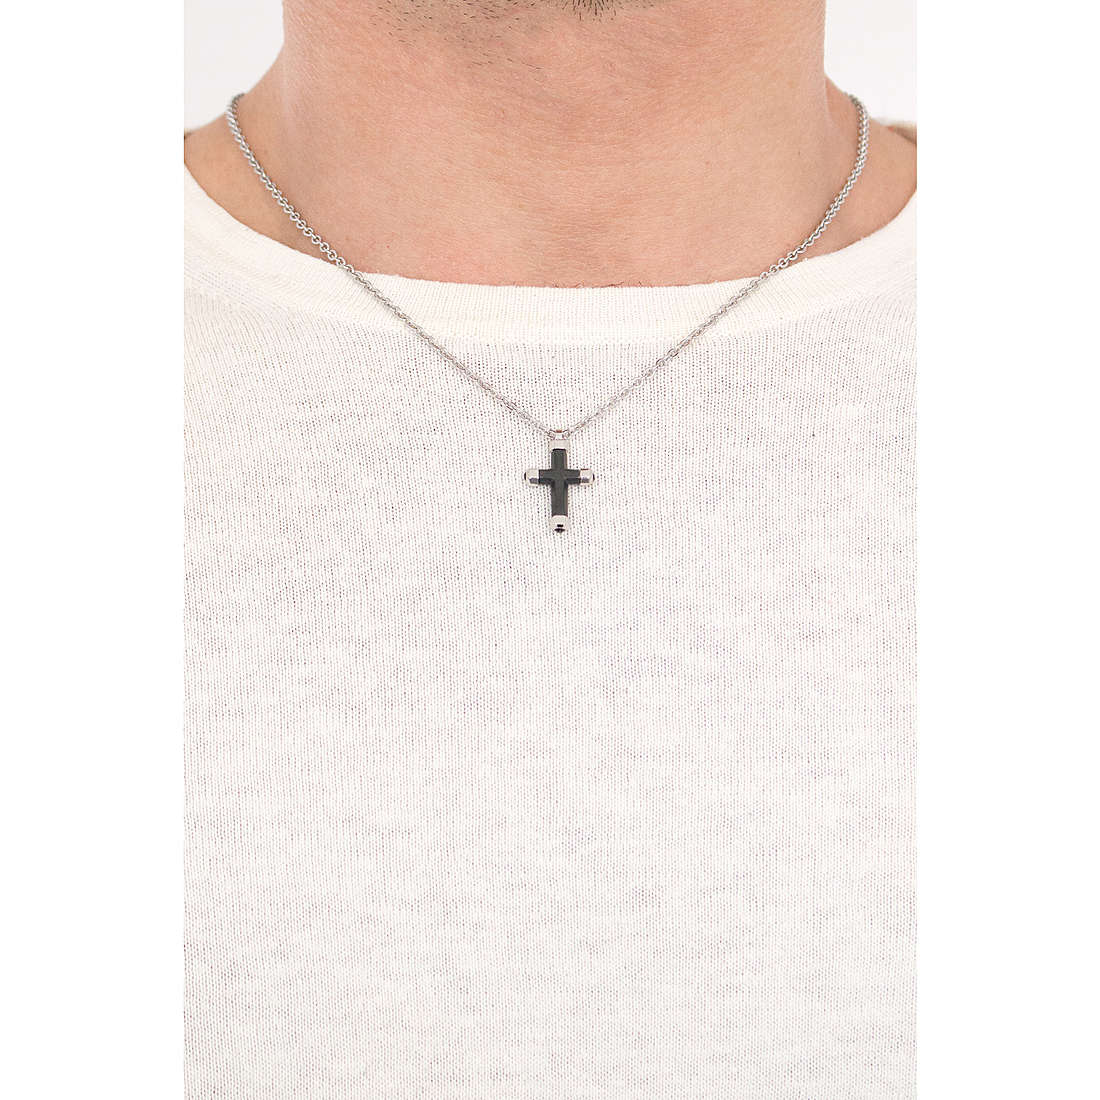 Brosway necklaces Crux man BRX04 wearing